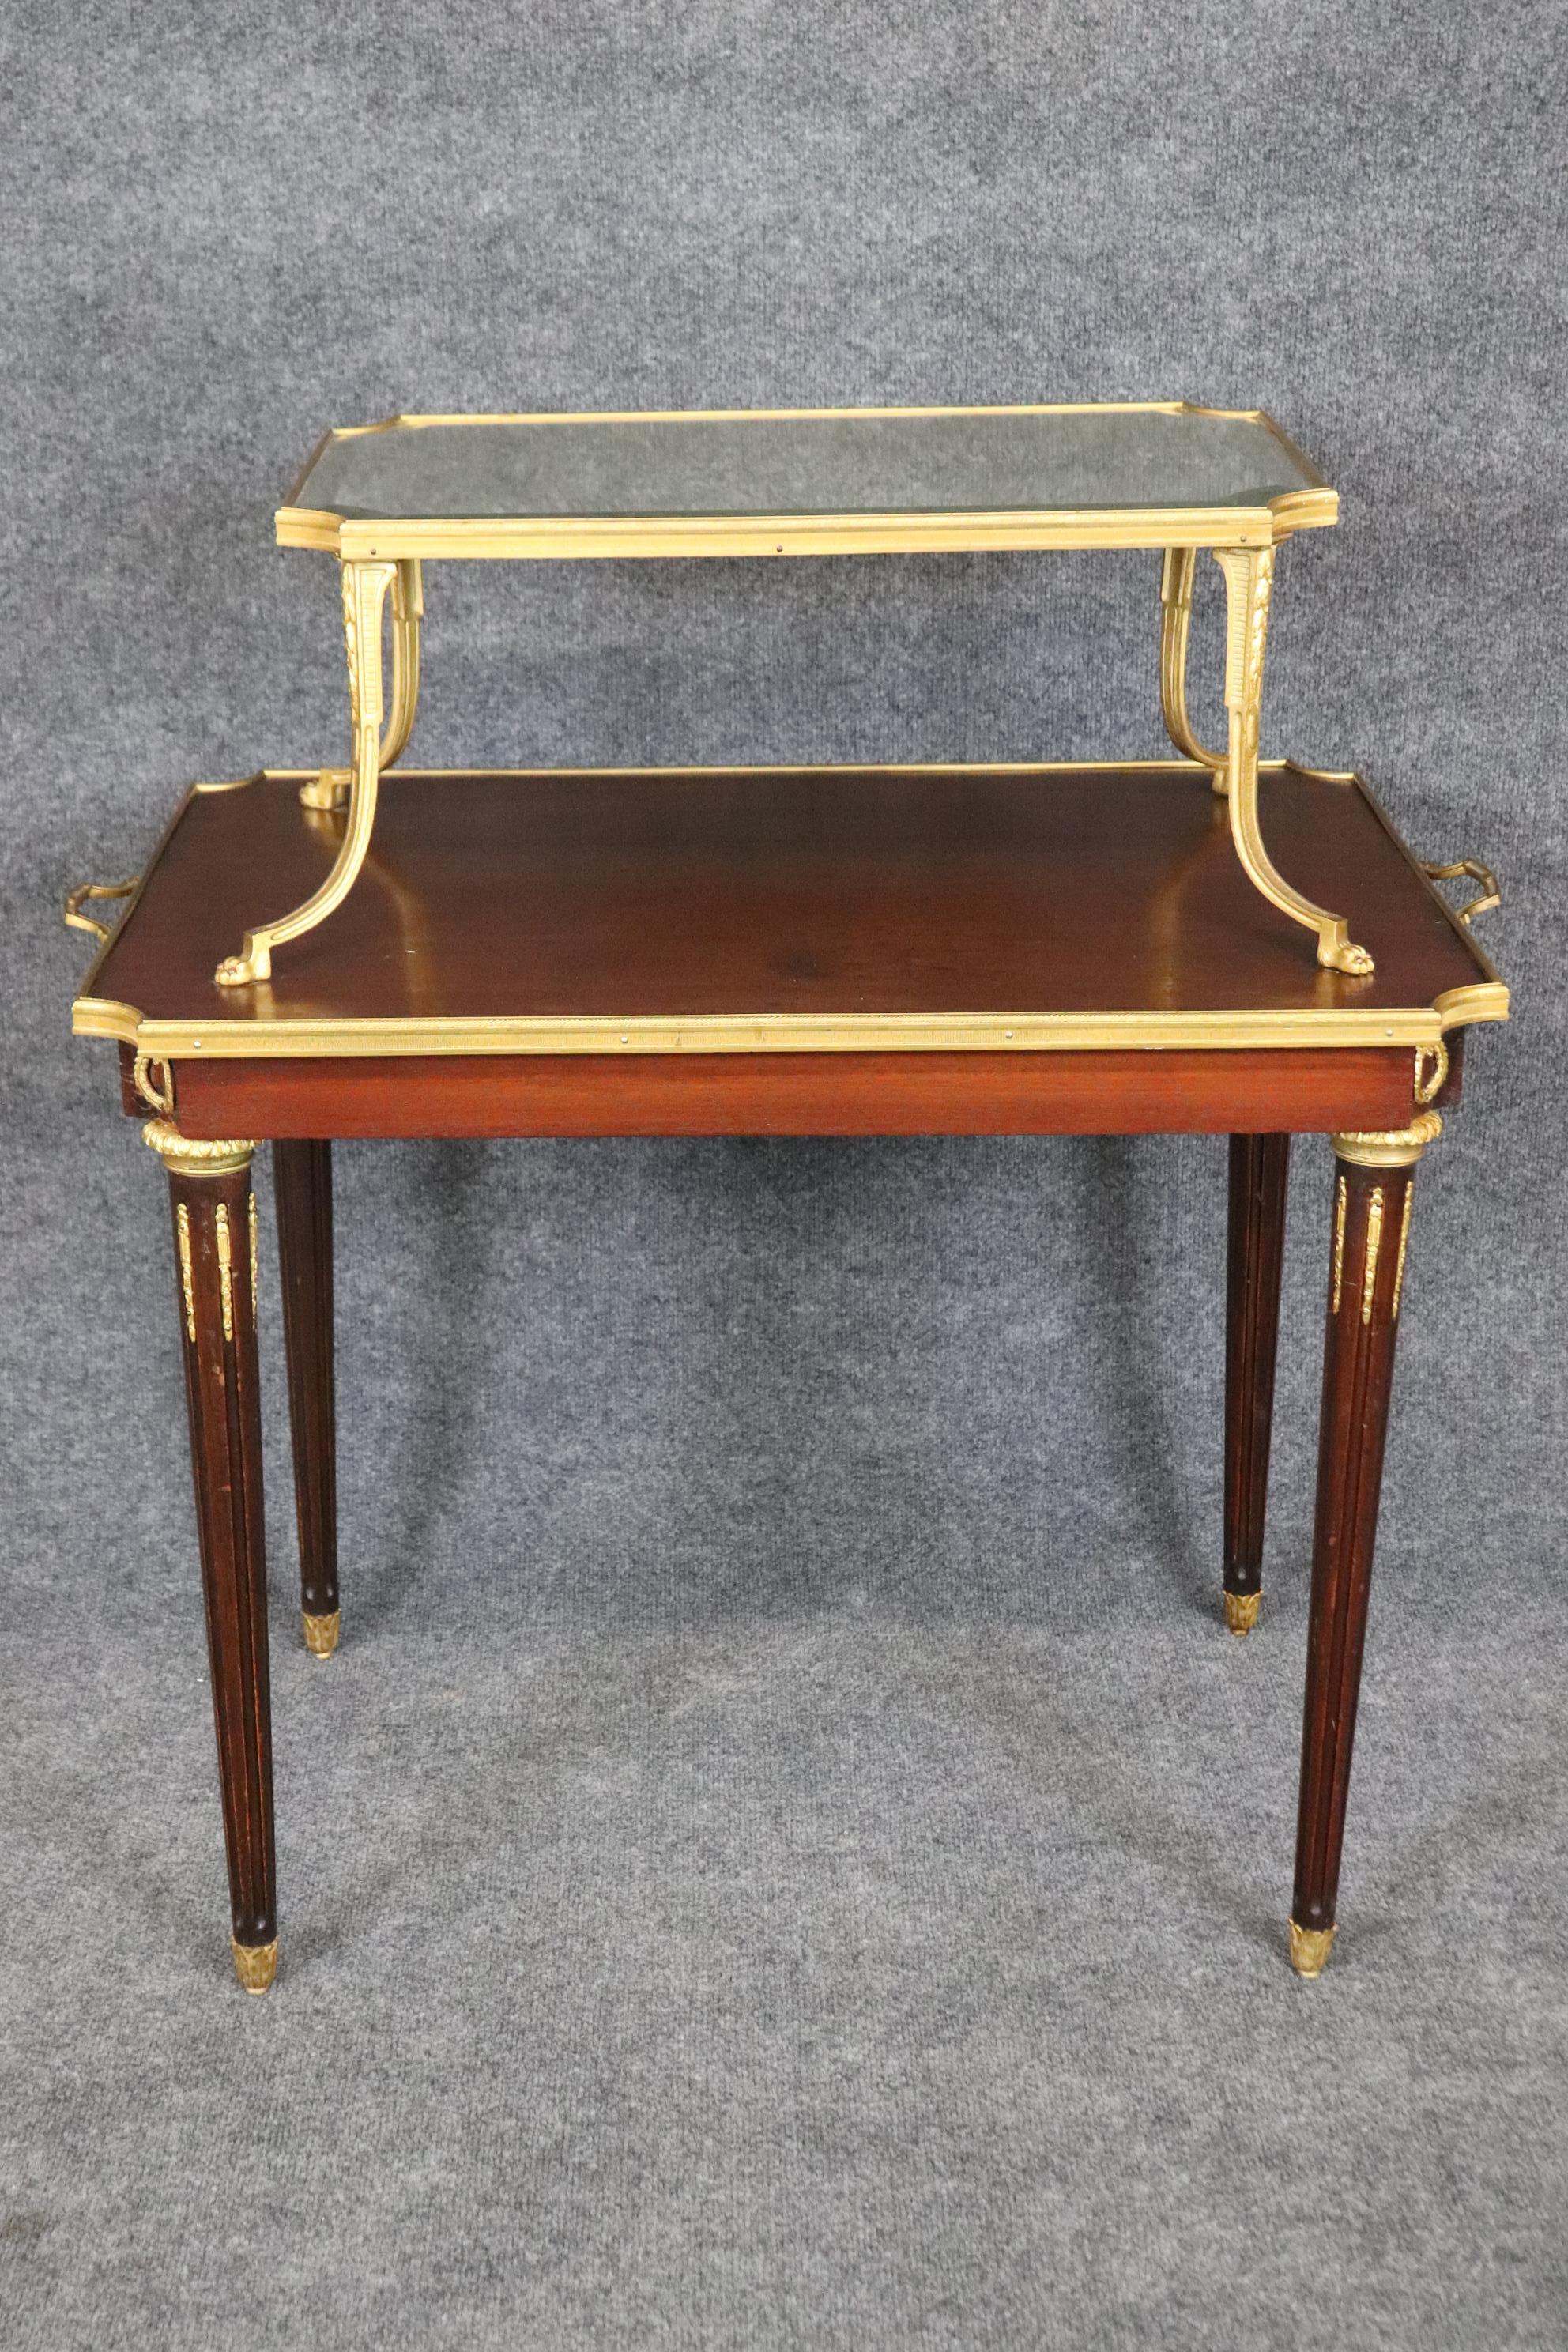 Fine Quality French Dore' Bronze and Mahogany Directoire Dessert Tray Top Table For Sale 2